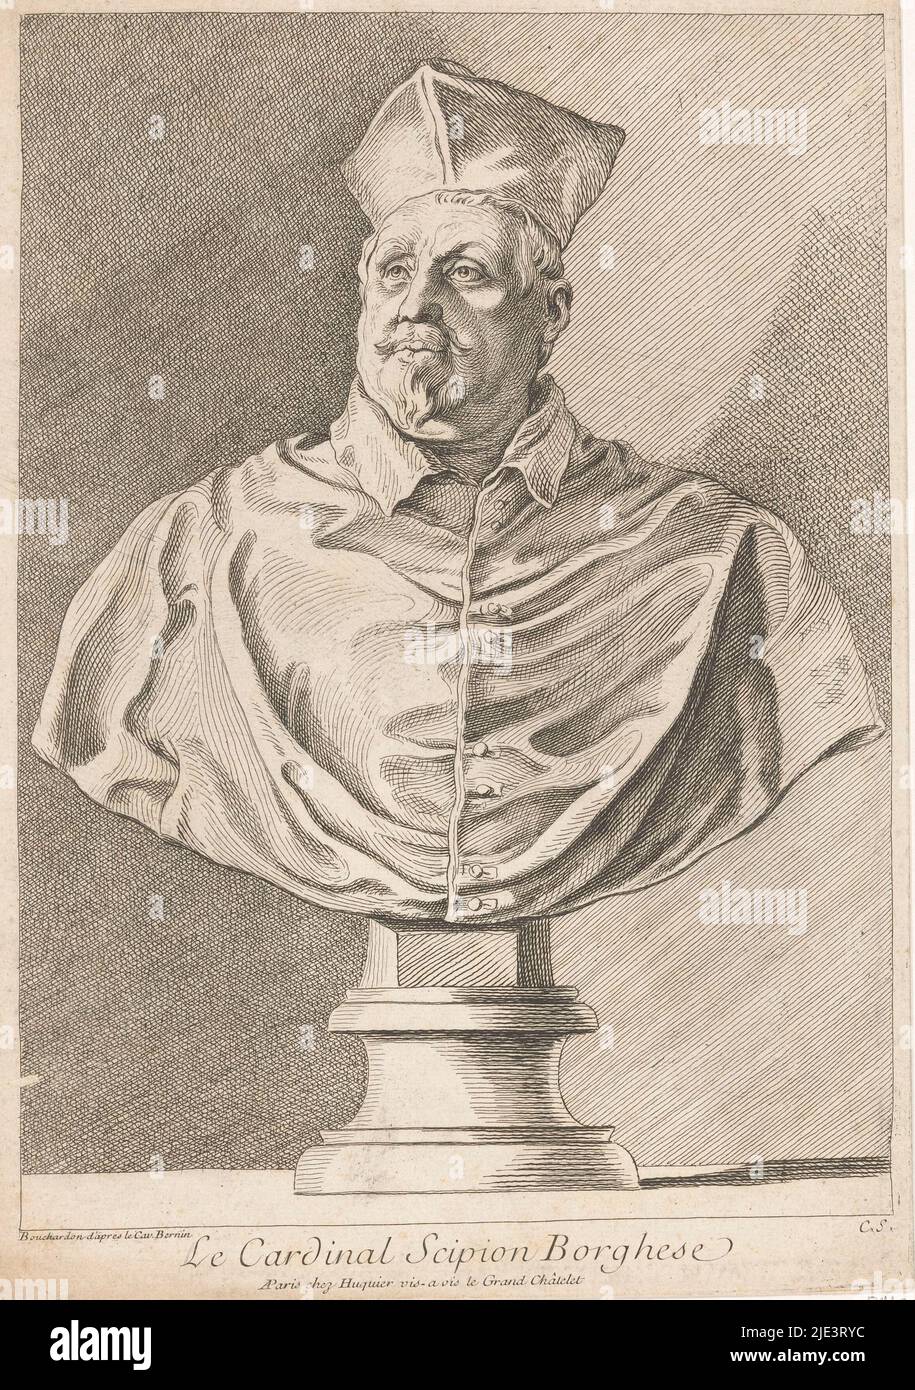 Portrait bust of Cardinal Scipione Borghese, print maker: Anne Claude Philippe Caylus, Giovanni Lorenzo Bernini, (mentioned on object), Edme Bouchardon, (mentioned on object), Paris, 1708 - 1762, paper, etching, h 268 mm × w 189 mm Stock Photo